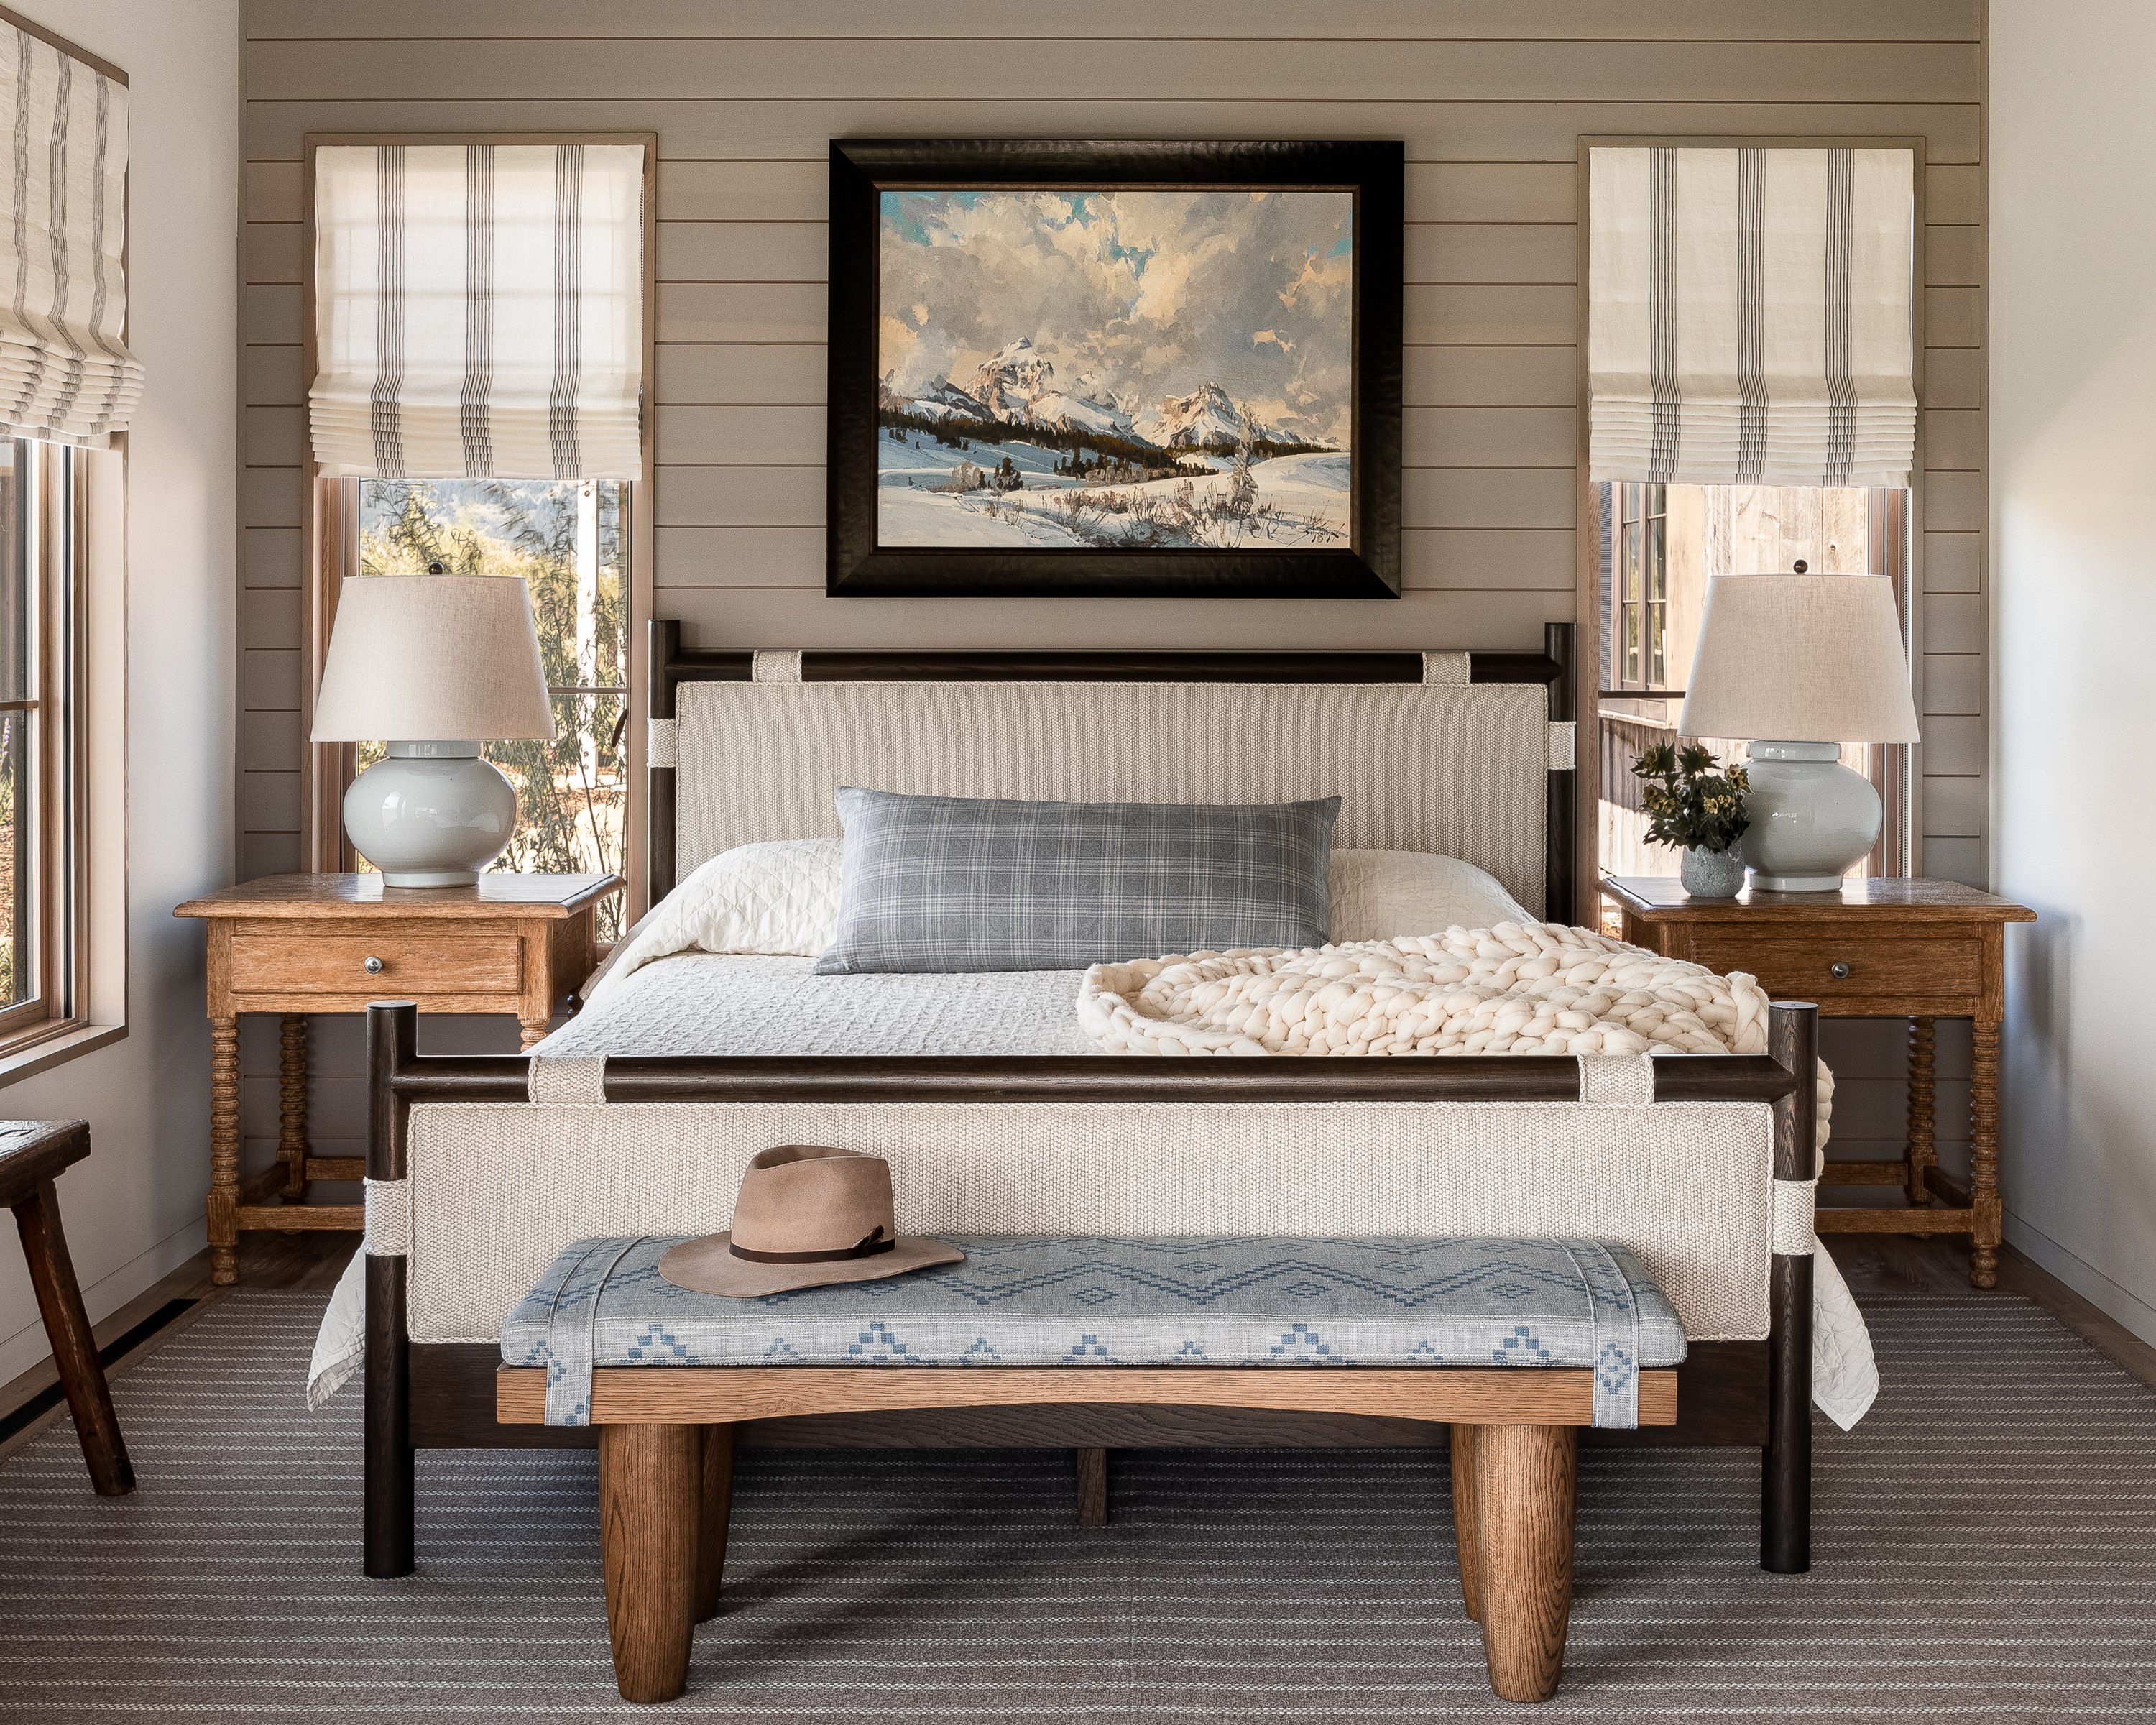 Cool blue tones and textures mixed with various wood tones in the bedroom.